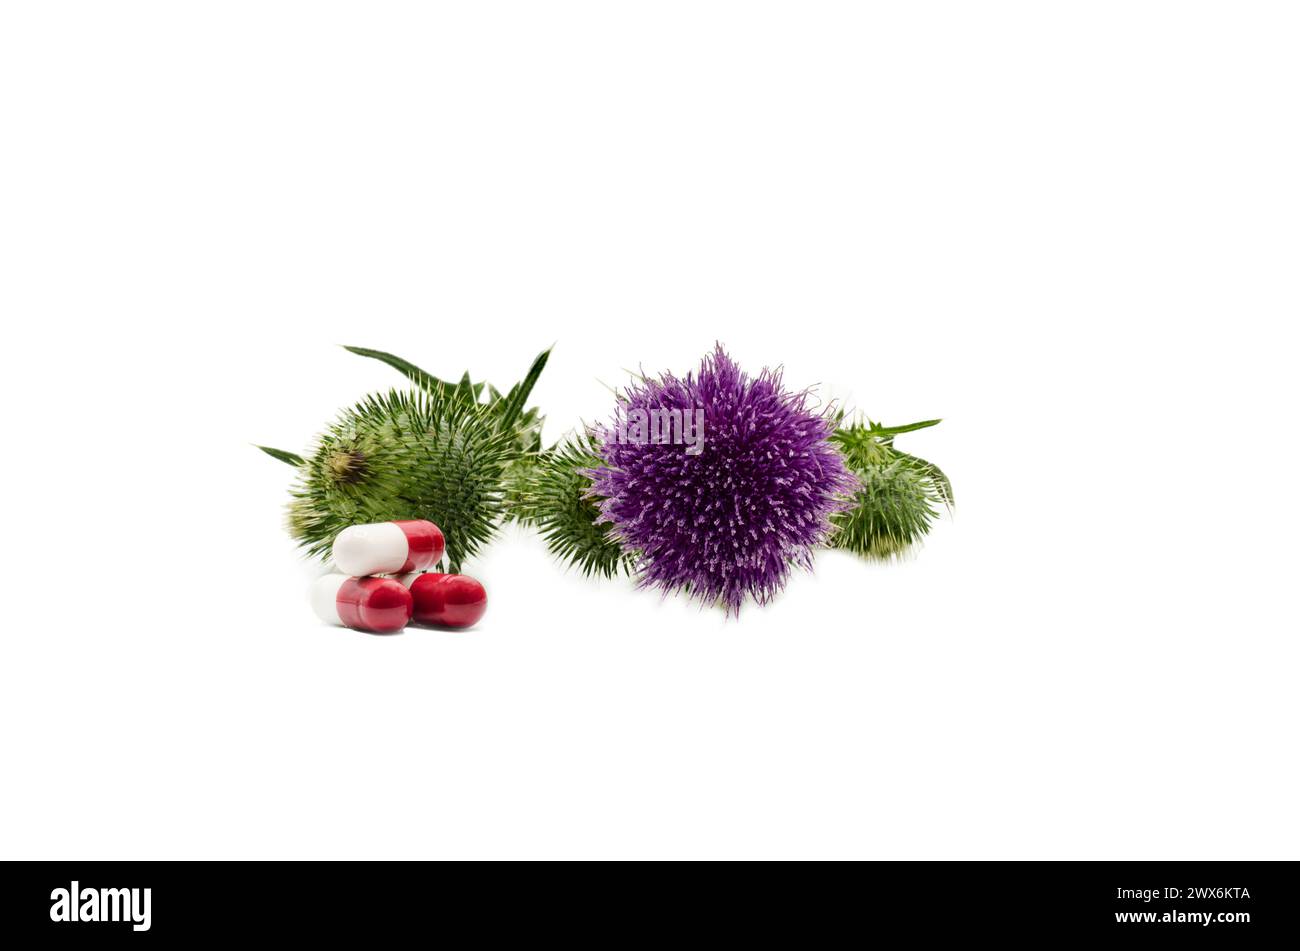 Herbs medical concept Food supplement, Herbal medicine in capsules from plants Milk Thistle. Isolated white background Stock Photo